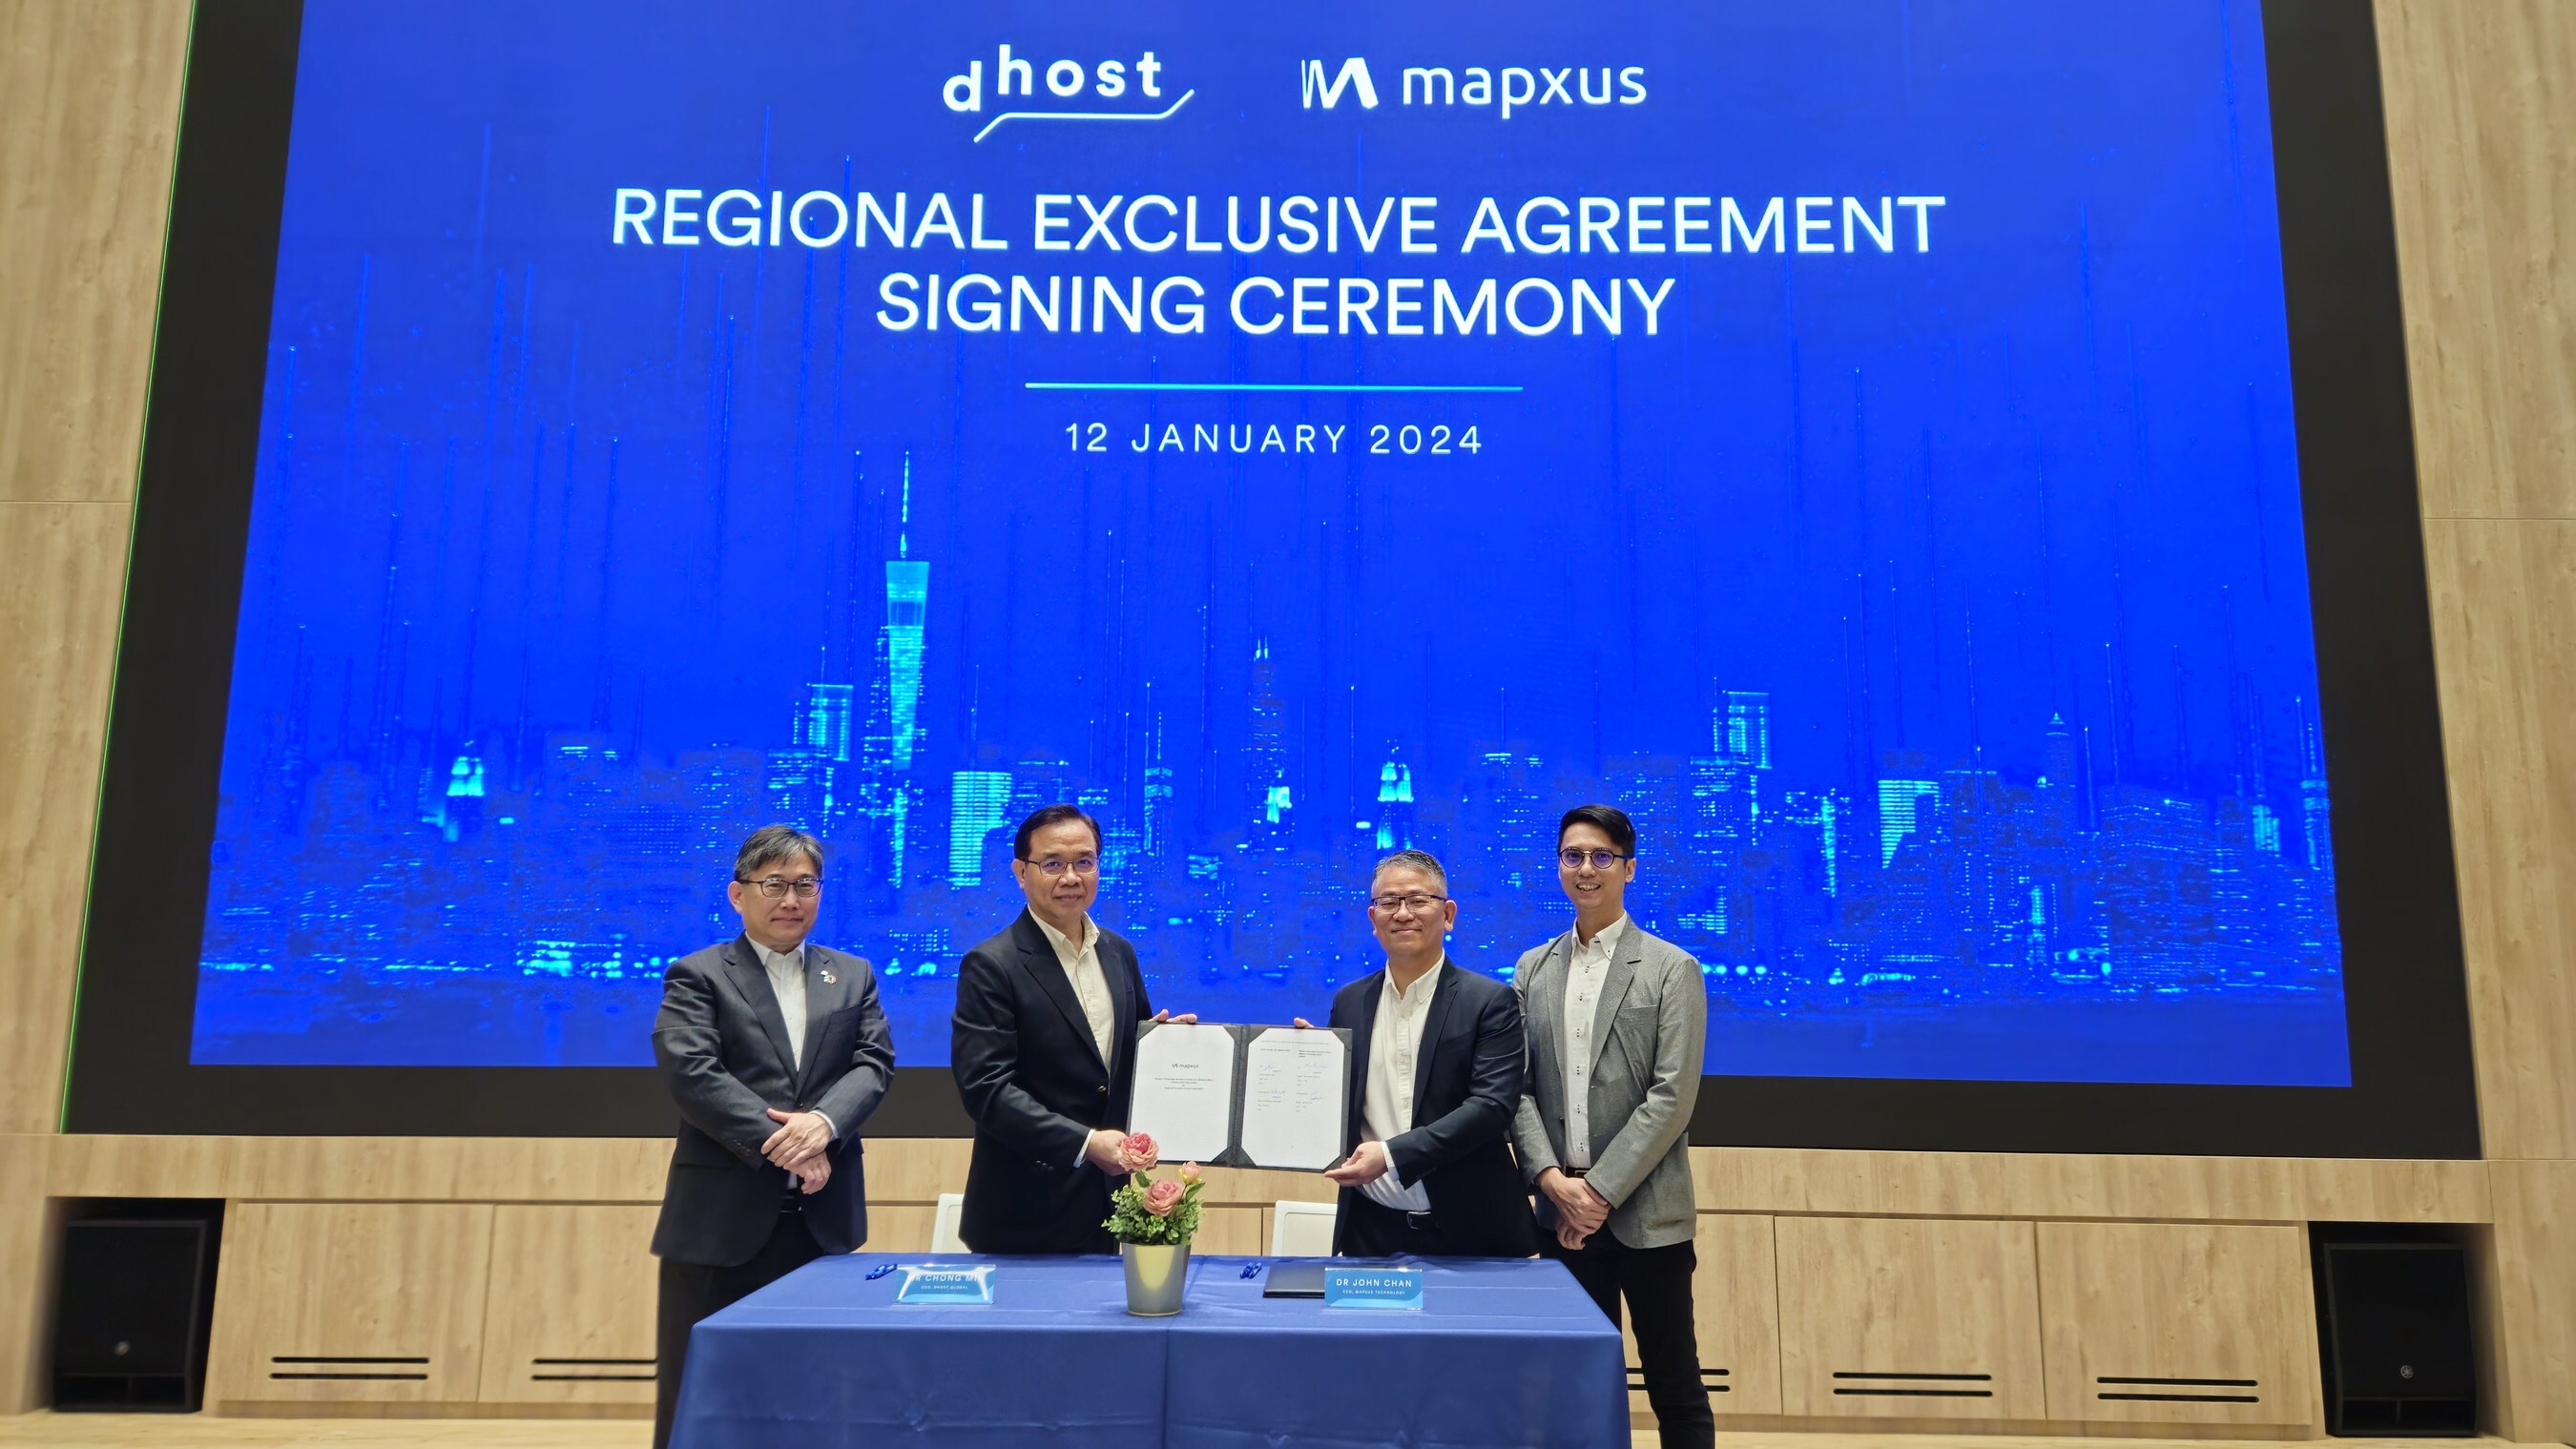 DHOST AND MAPXUS FORGE LANDMARK PARTNERSHIP TO REDEFINE THE SMART BUILDING LANDSCAPE IN ASIA